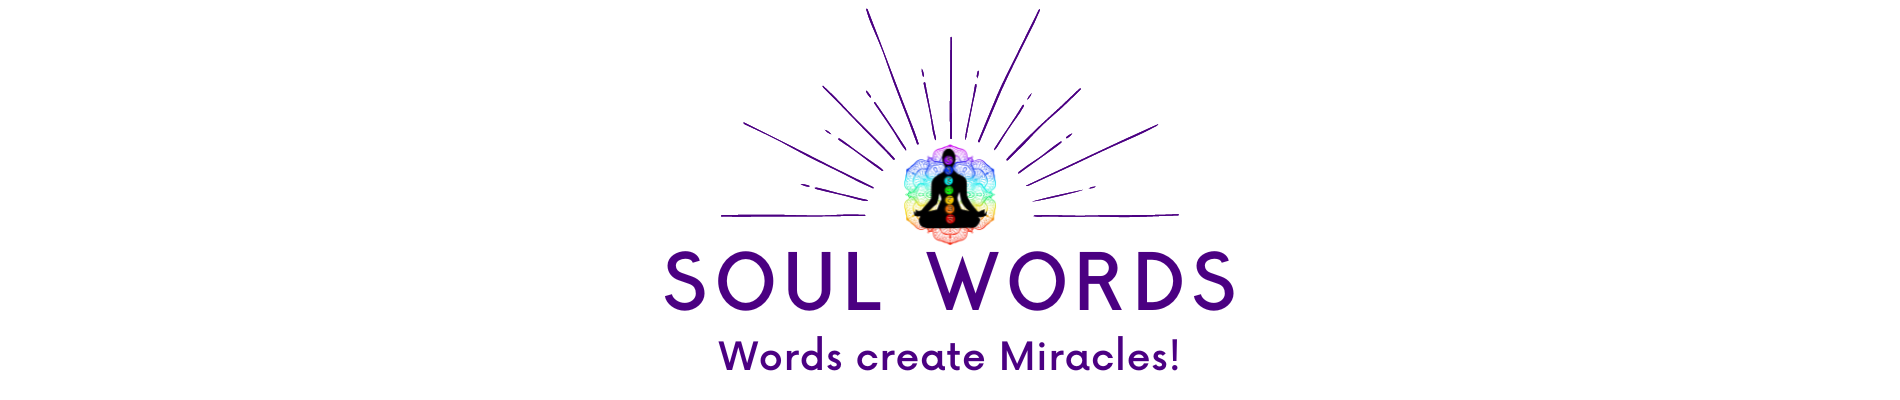 SOUL WORDS – Words create Miracles!